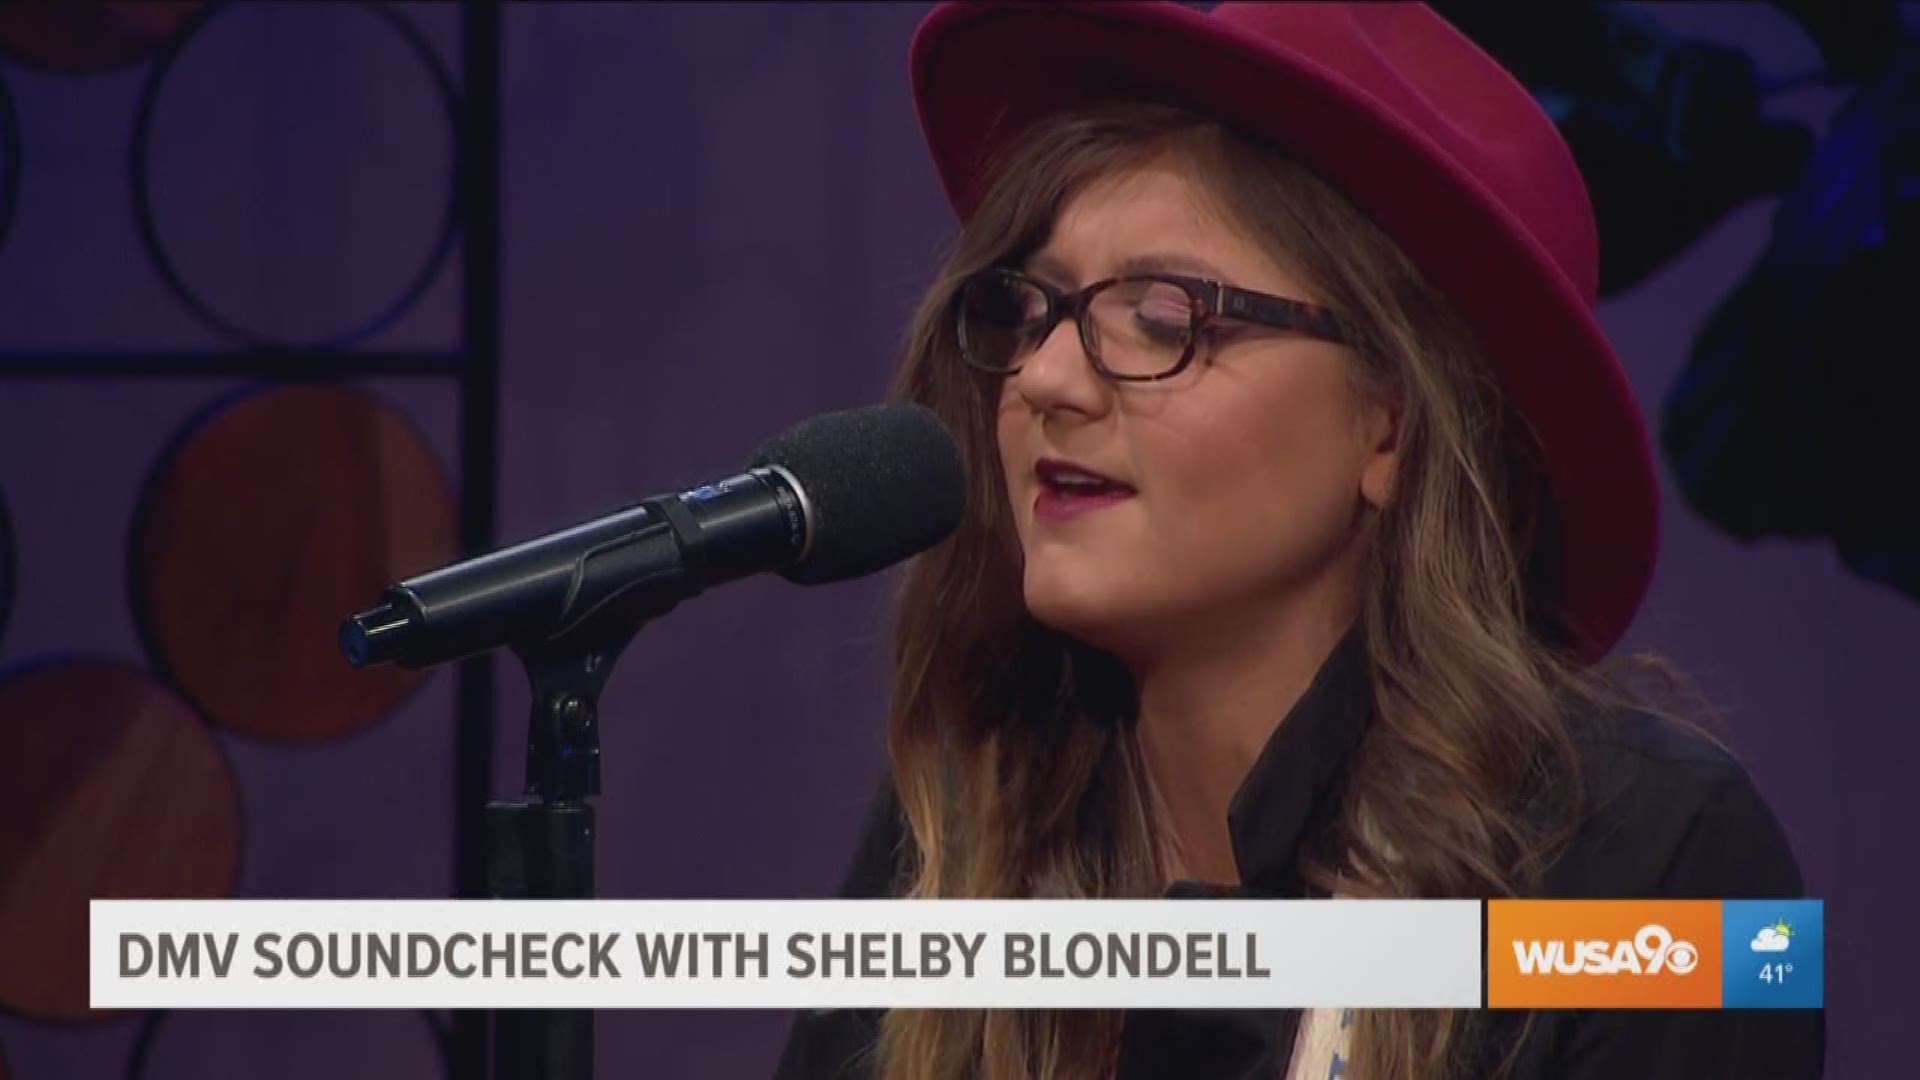 Shelby Blondell performs "Last Tonight" live.